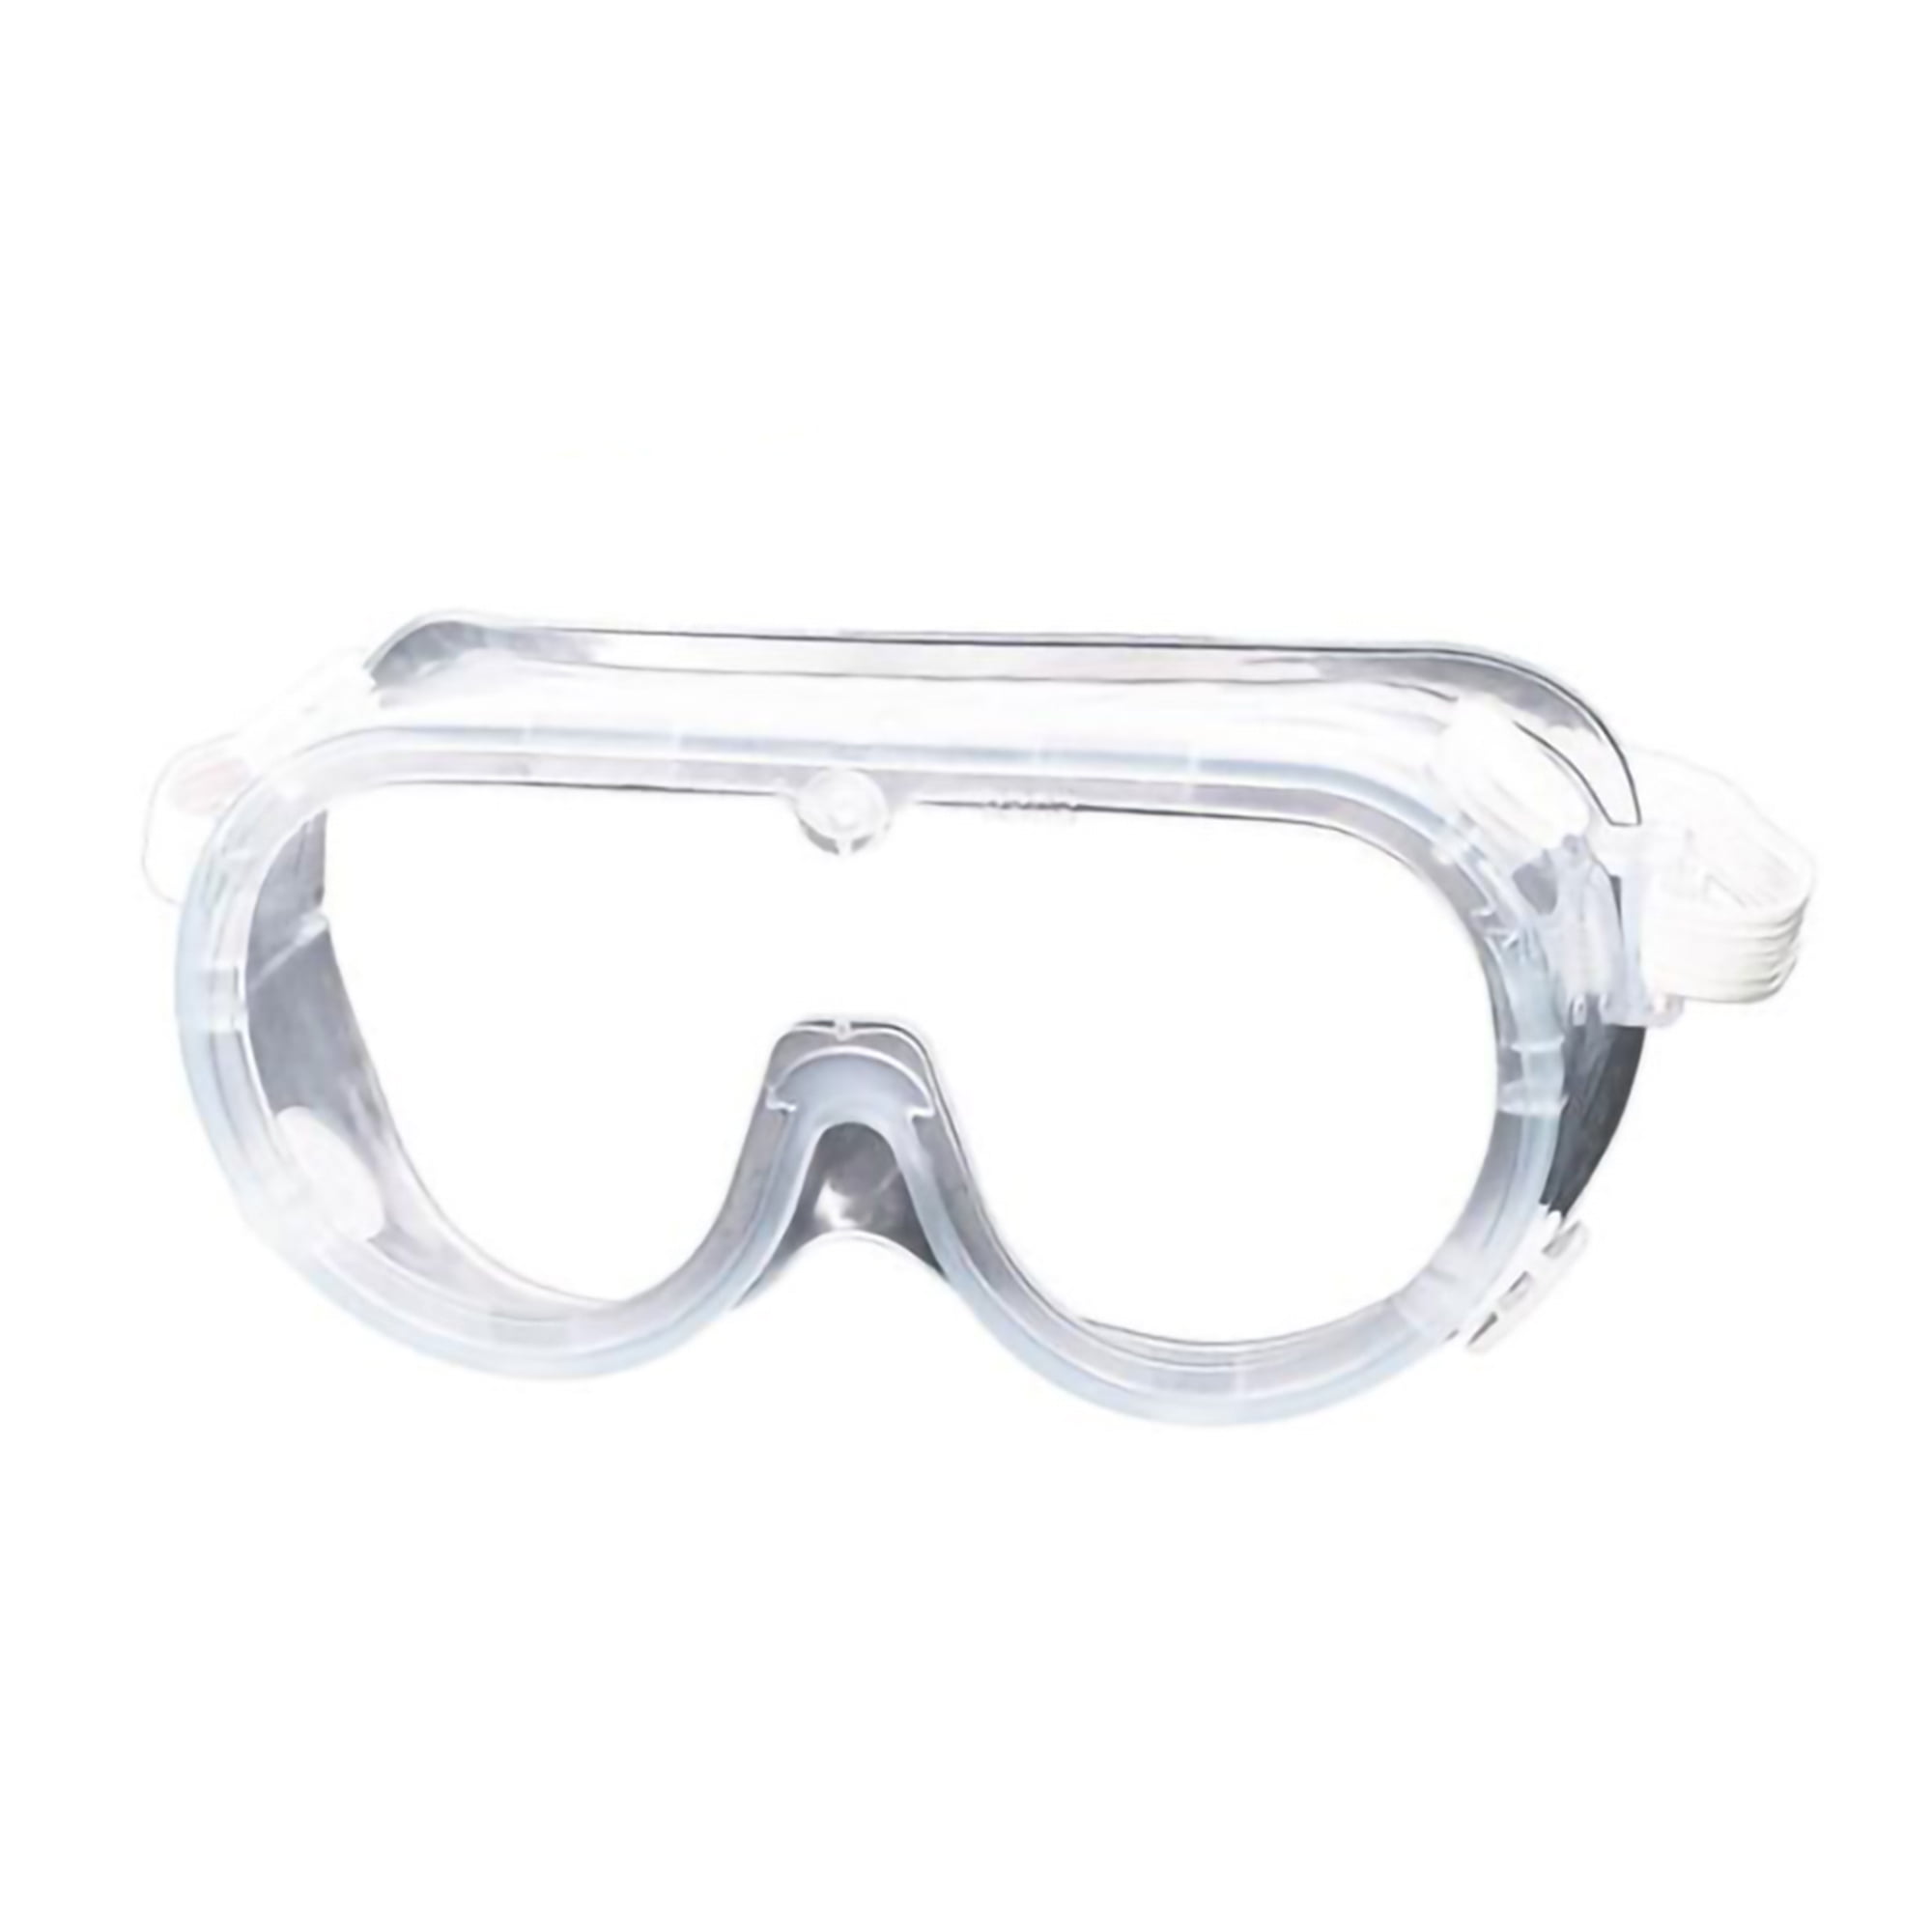 Anti virus Safety Goggles Glasses Protective Gear Eye Protection Out For Work 